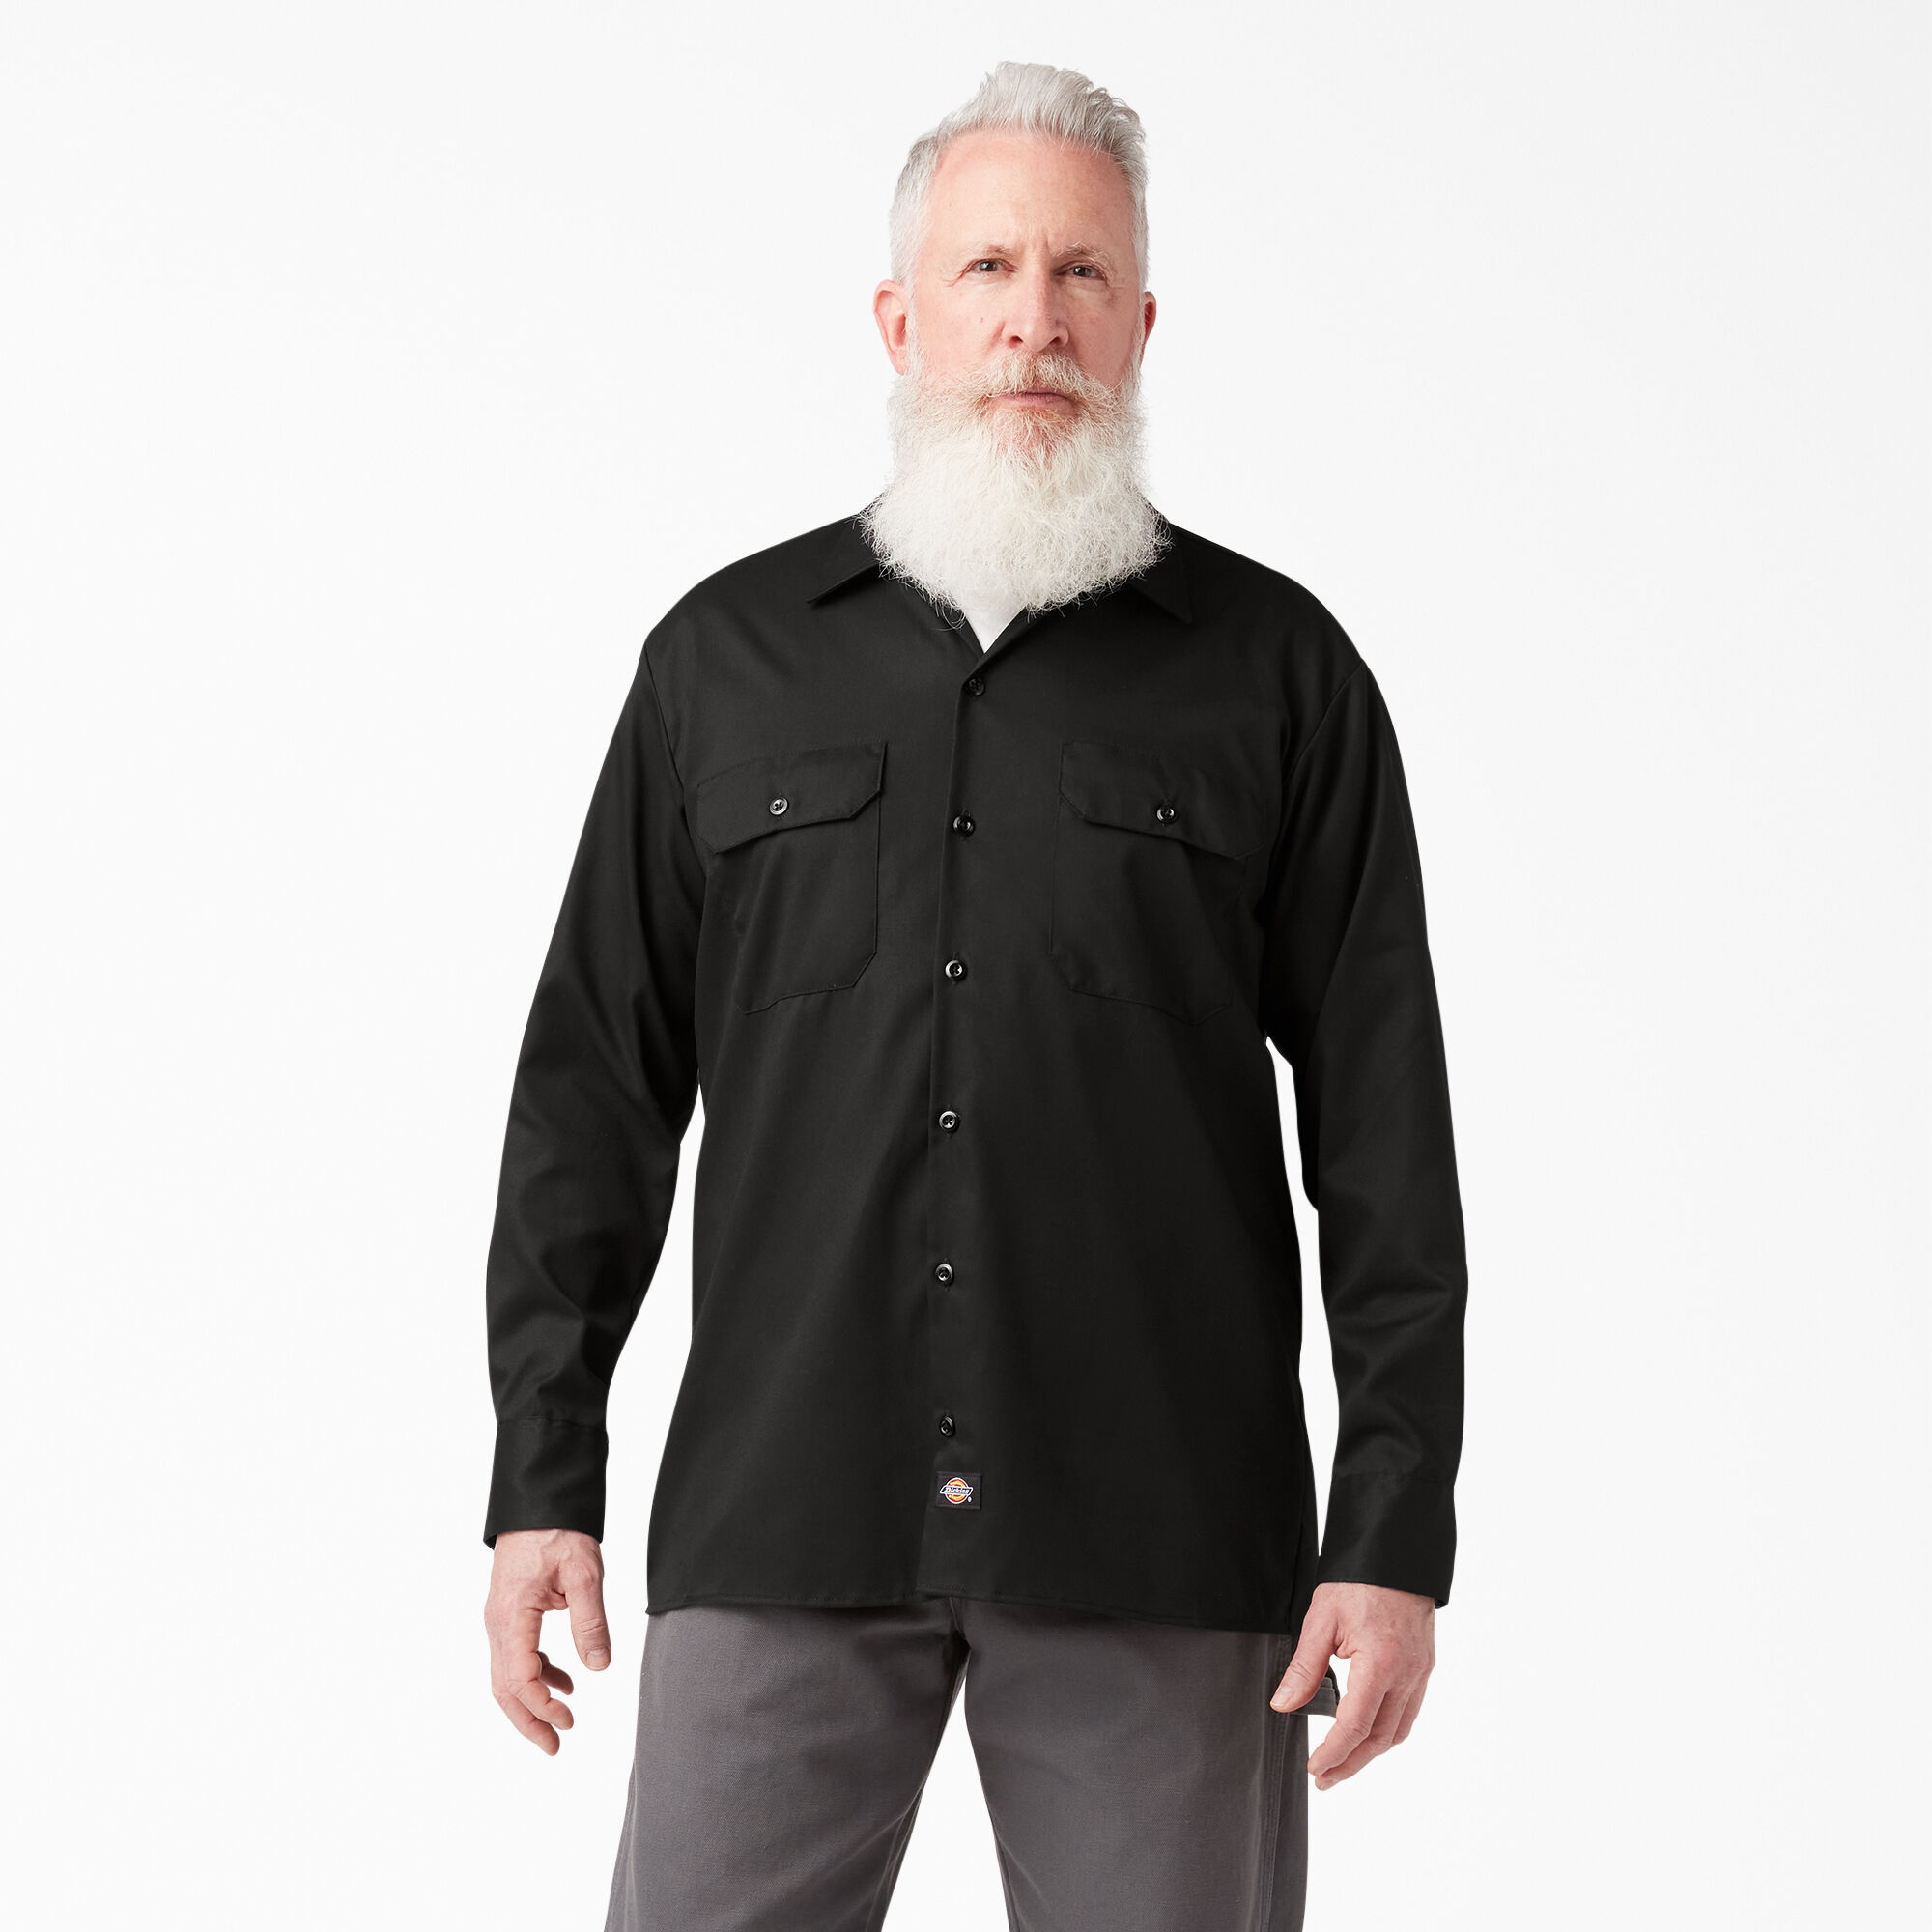 Relaxed Fit Long Sleeve Work Shirt